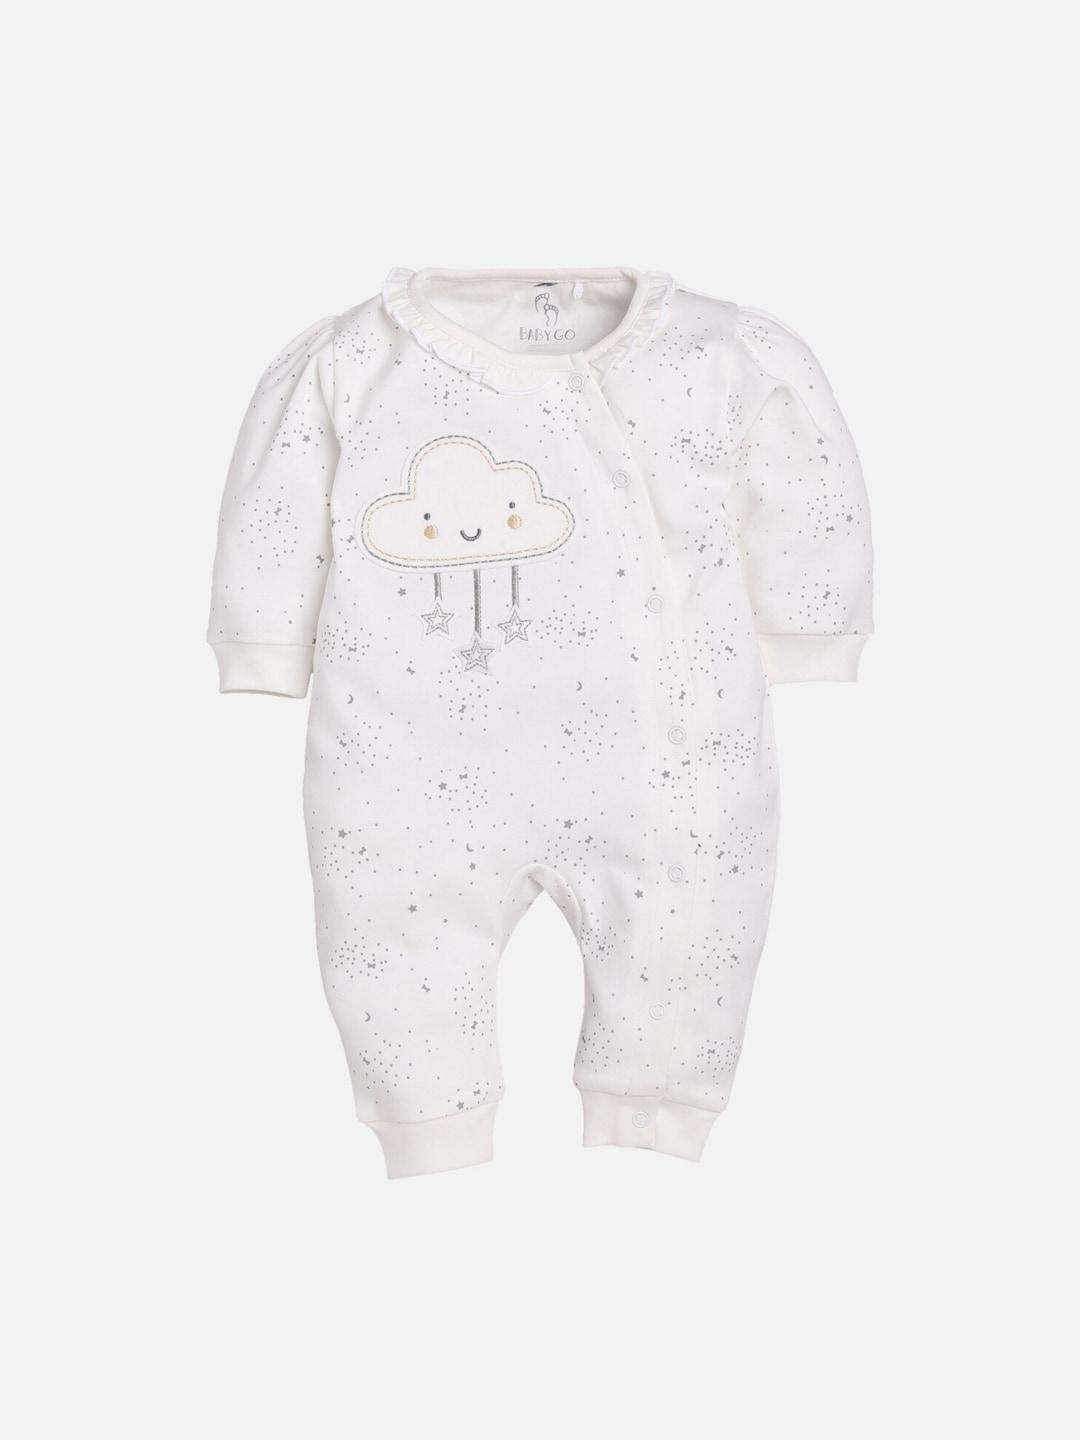 BABY GO Infant Kids White & Grey Printed Rompers